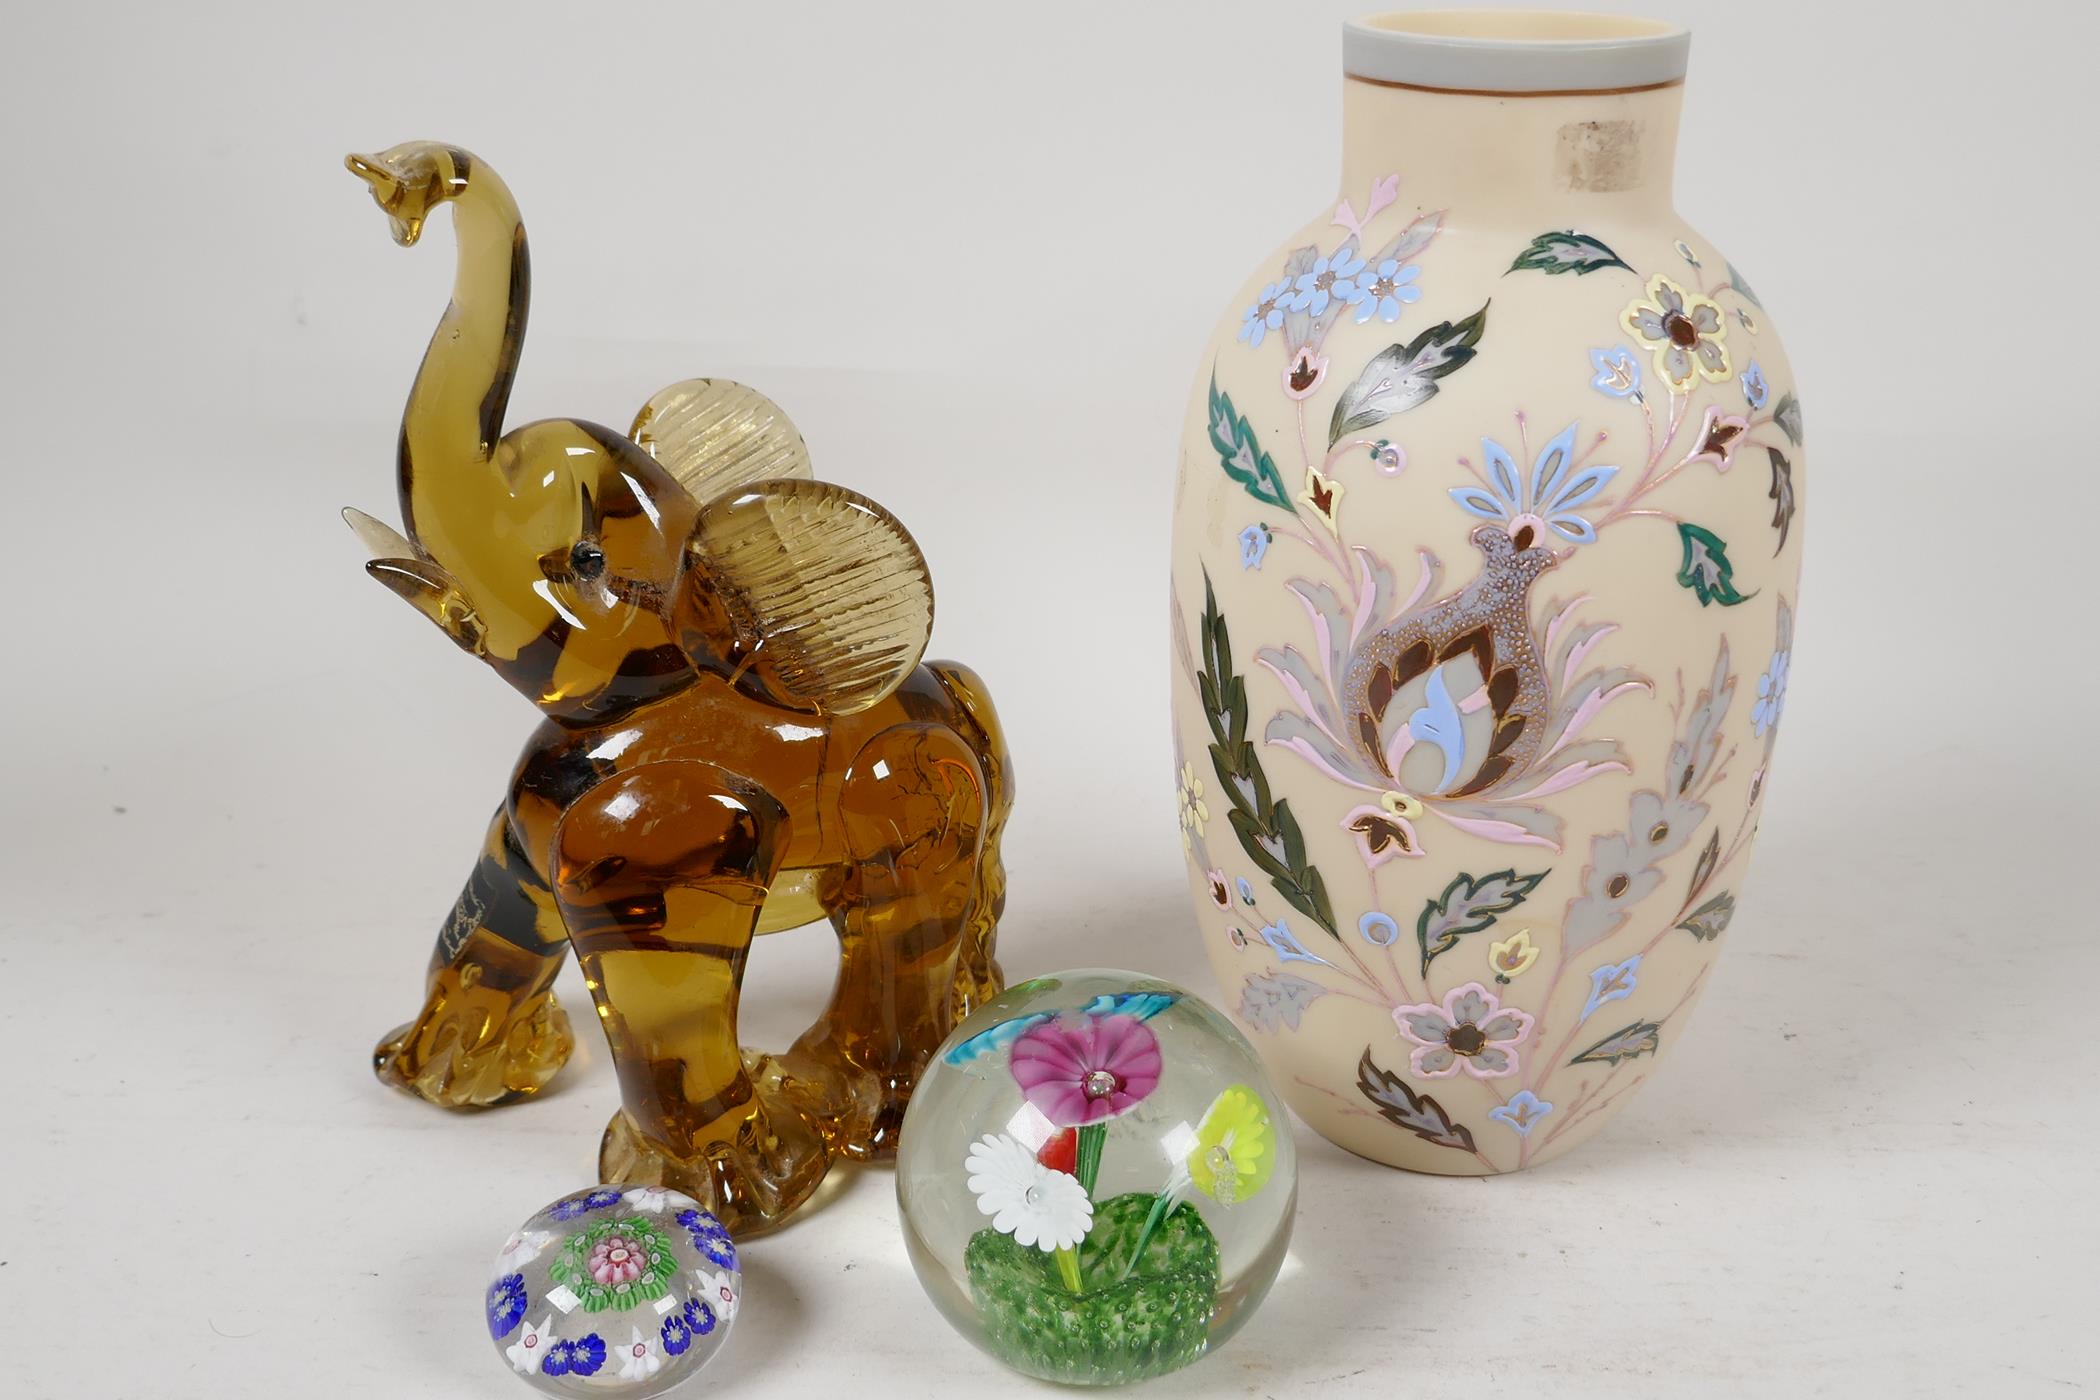 A C19th milk glass vase painted with flowers, 9" high, a Murano glass figure of an elephant and